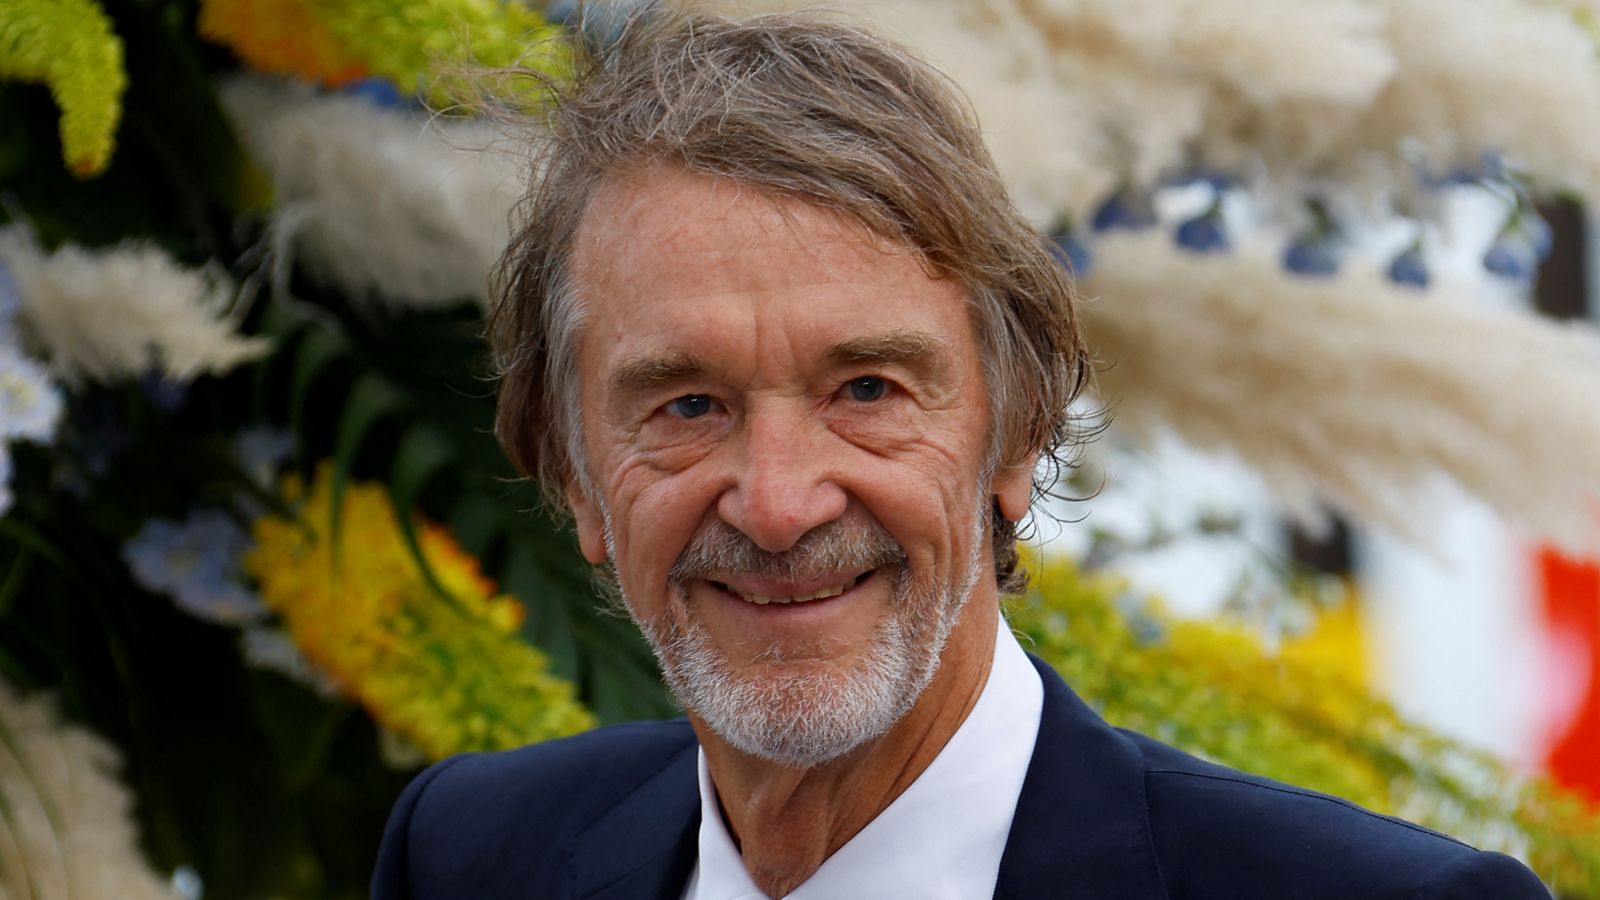 Sir Jim Ratcliffe joins Qataris in race to buy Manchester United